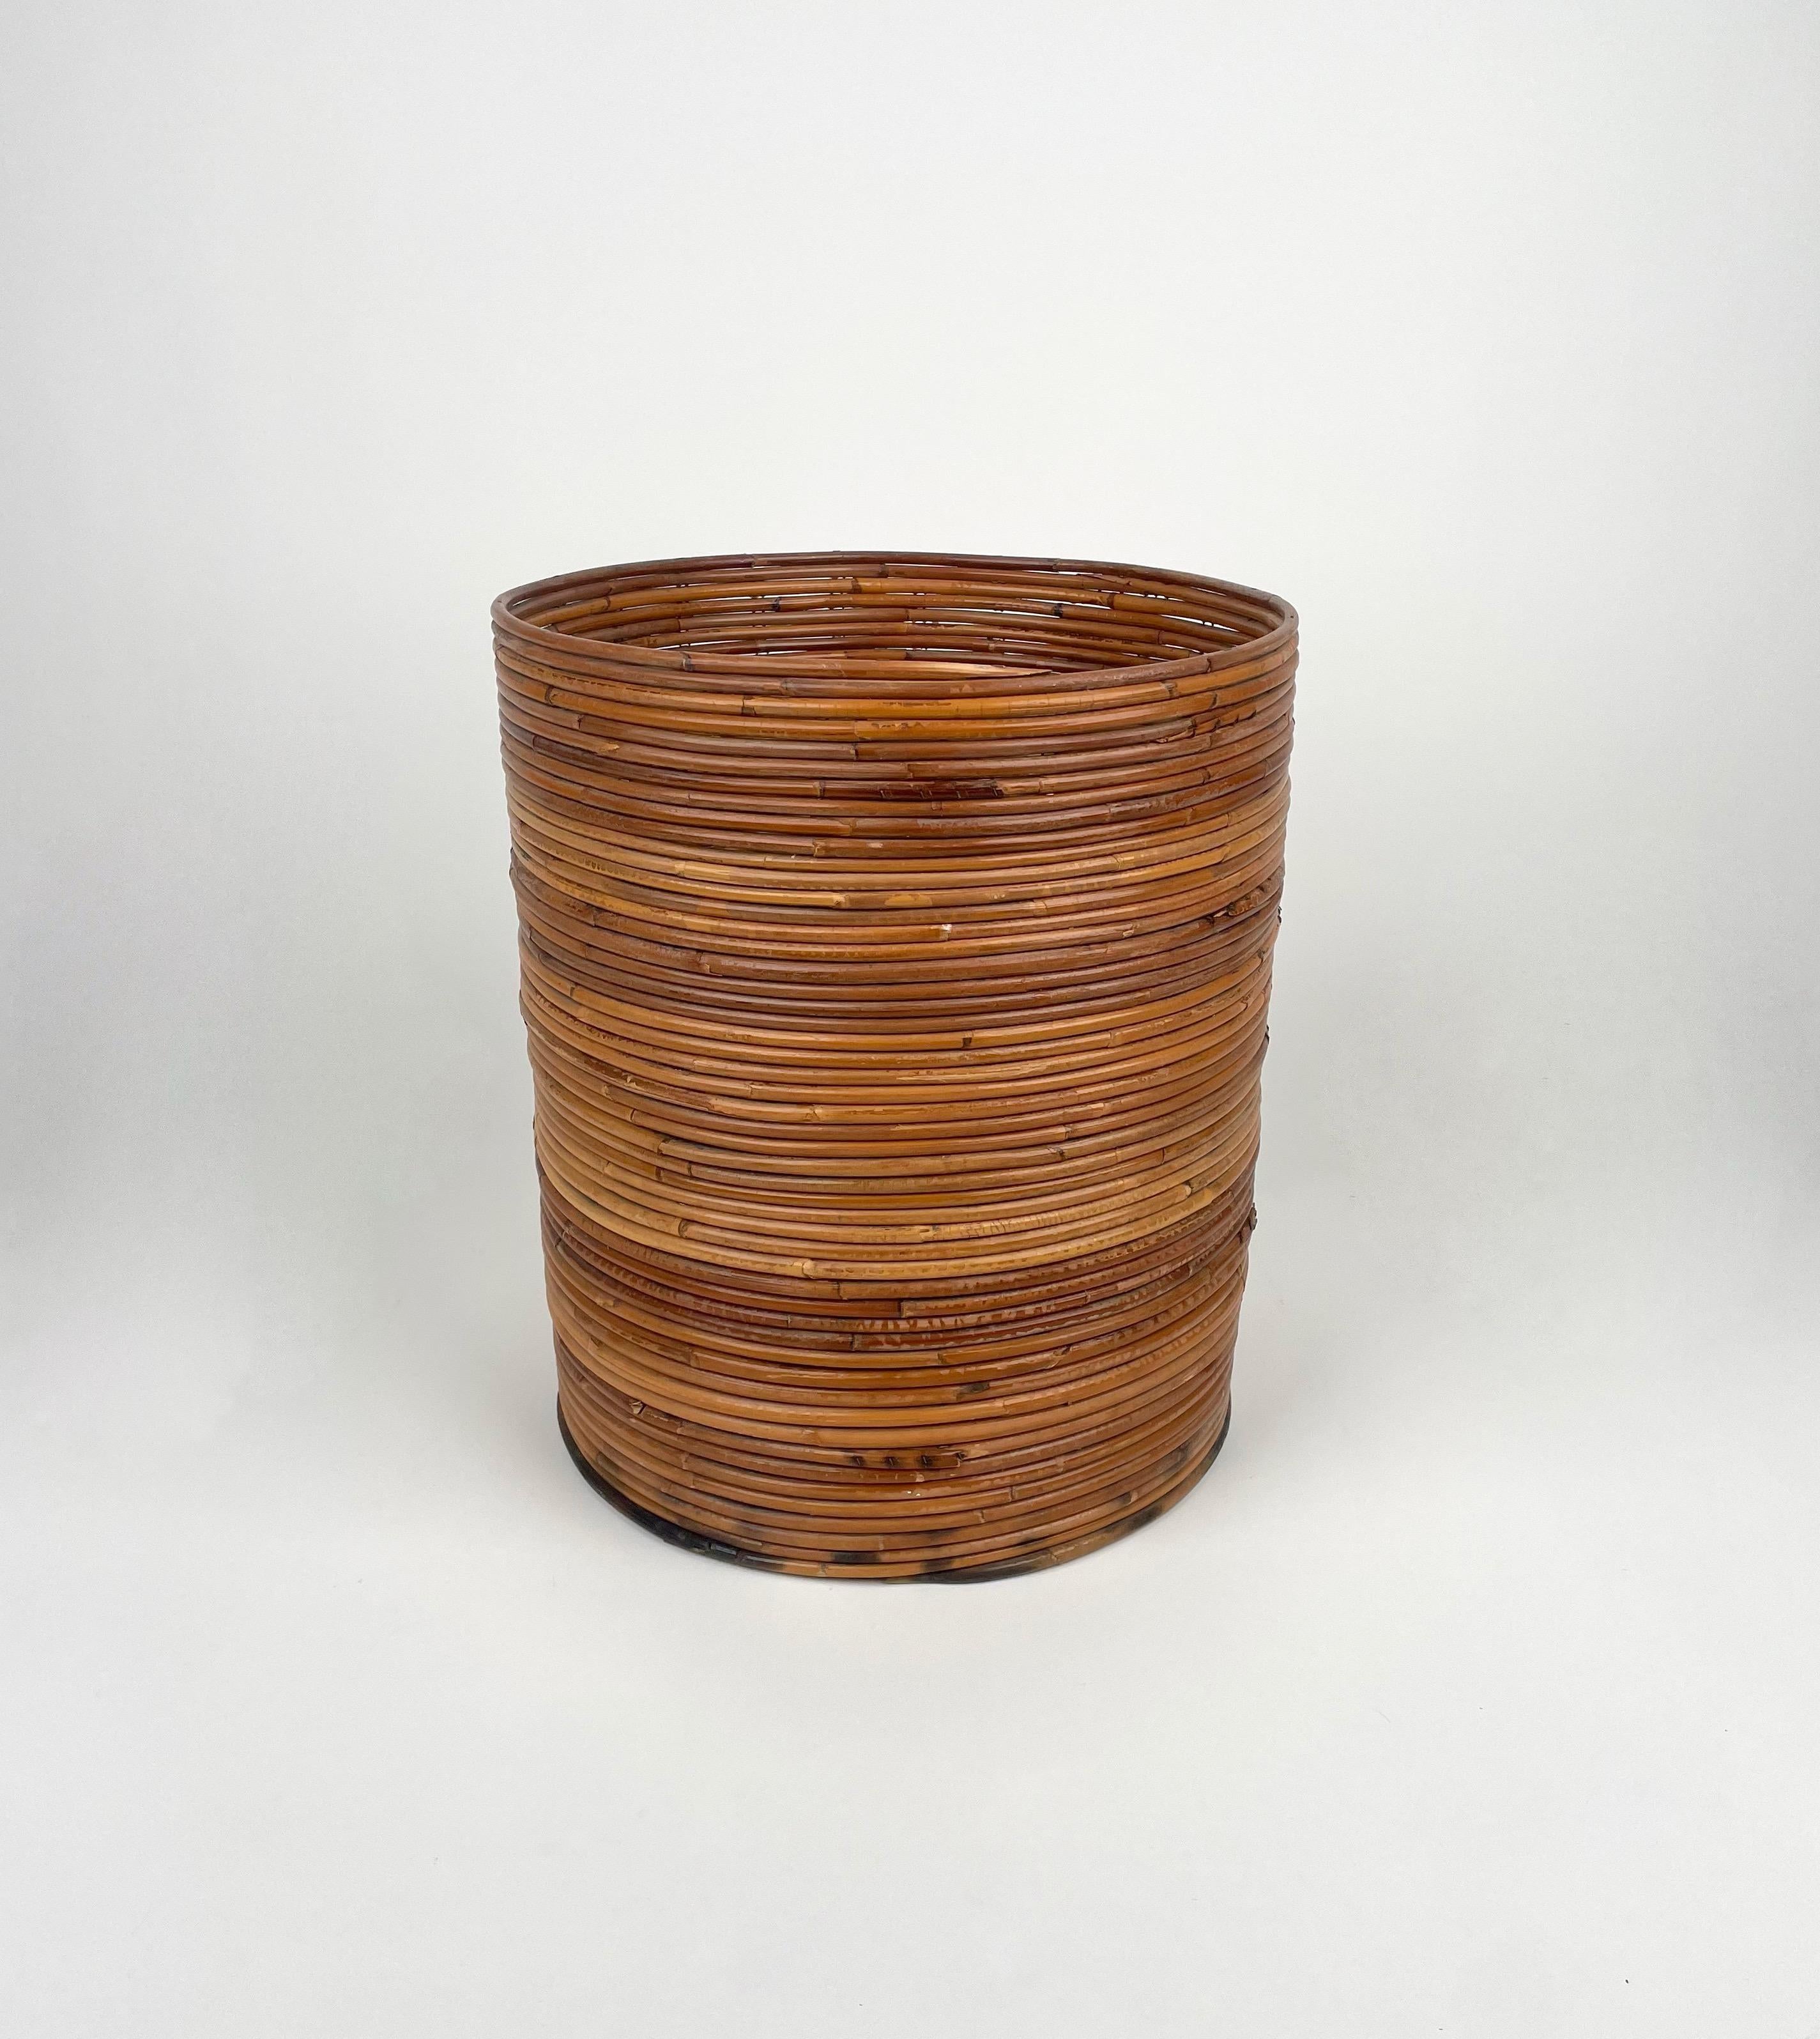 Italian Rattan and Bamboo Round Basket Plant Holder Vase, Italy, 1960s For Sale